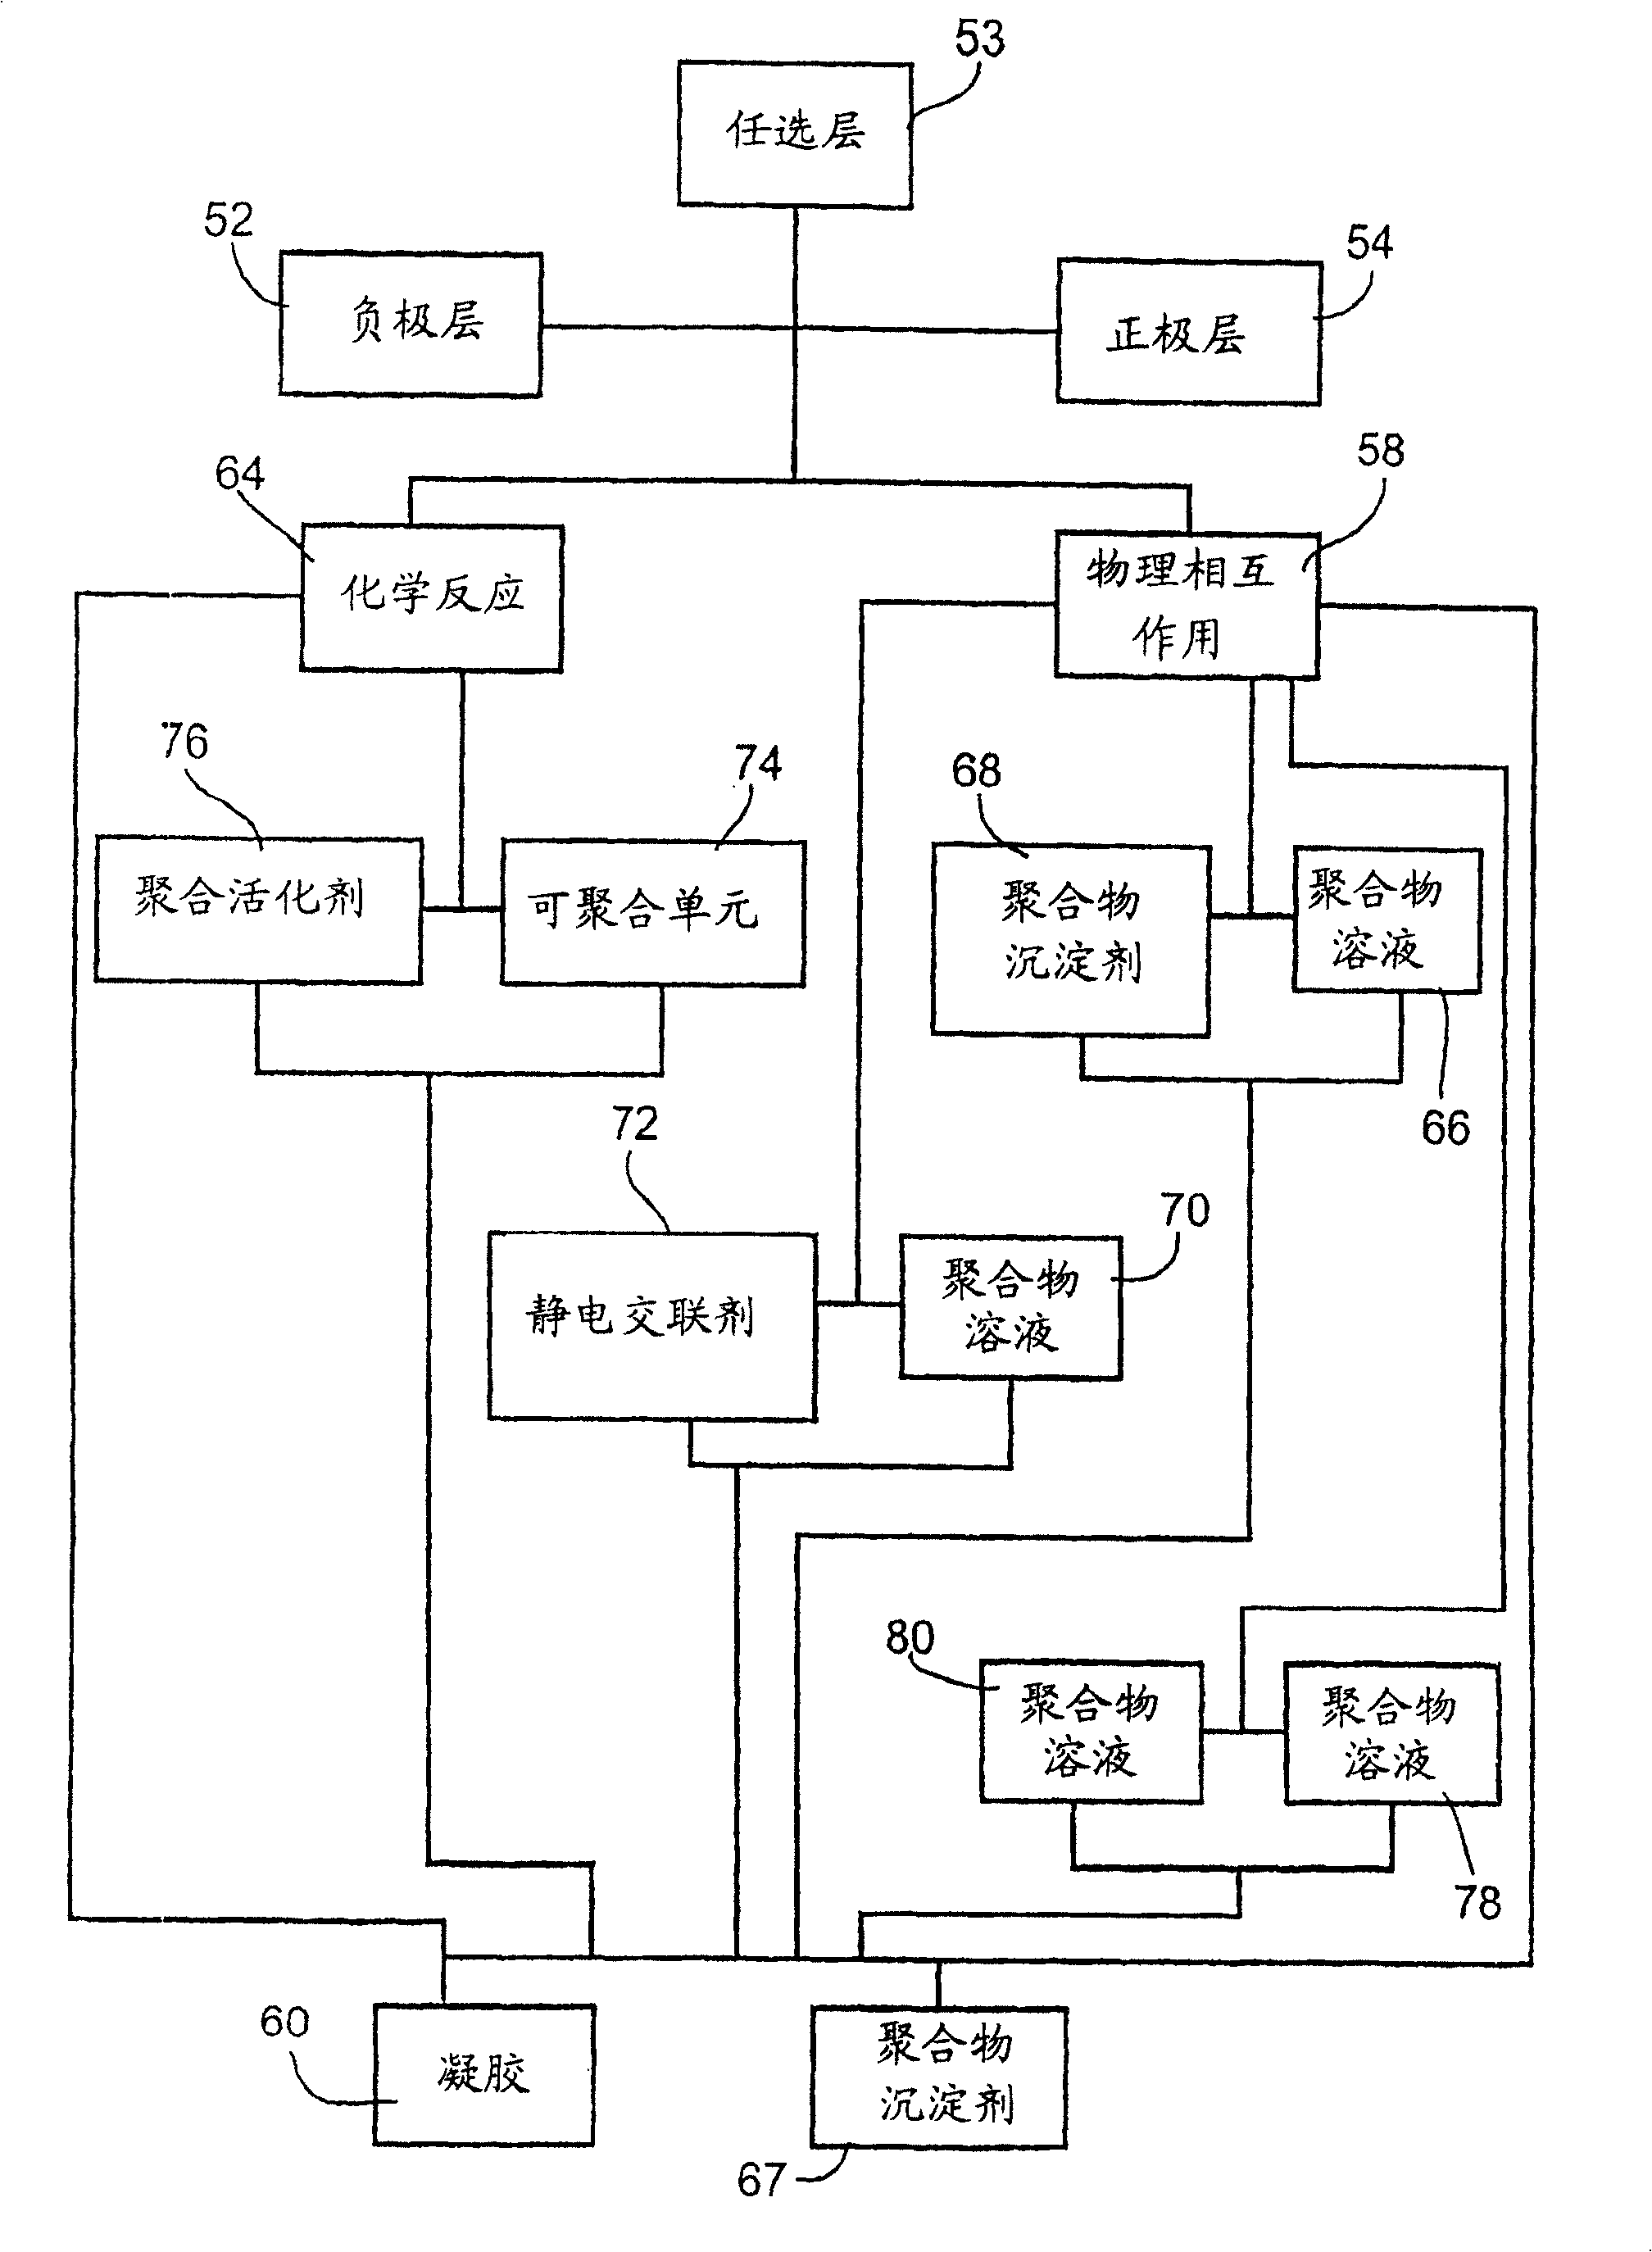 Thin layer electrochemical cell with self-formed separator film